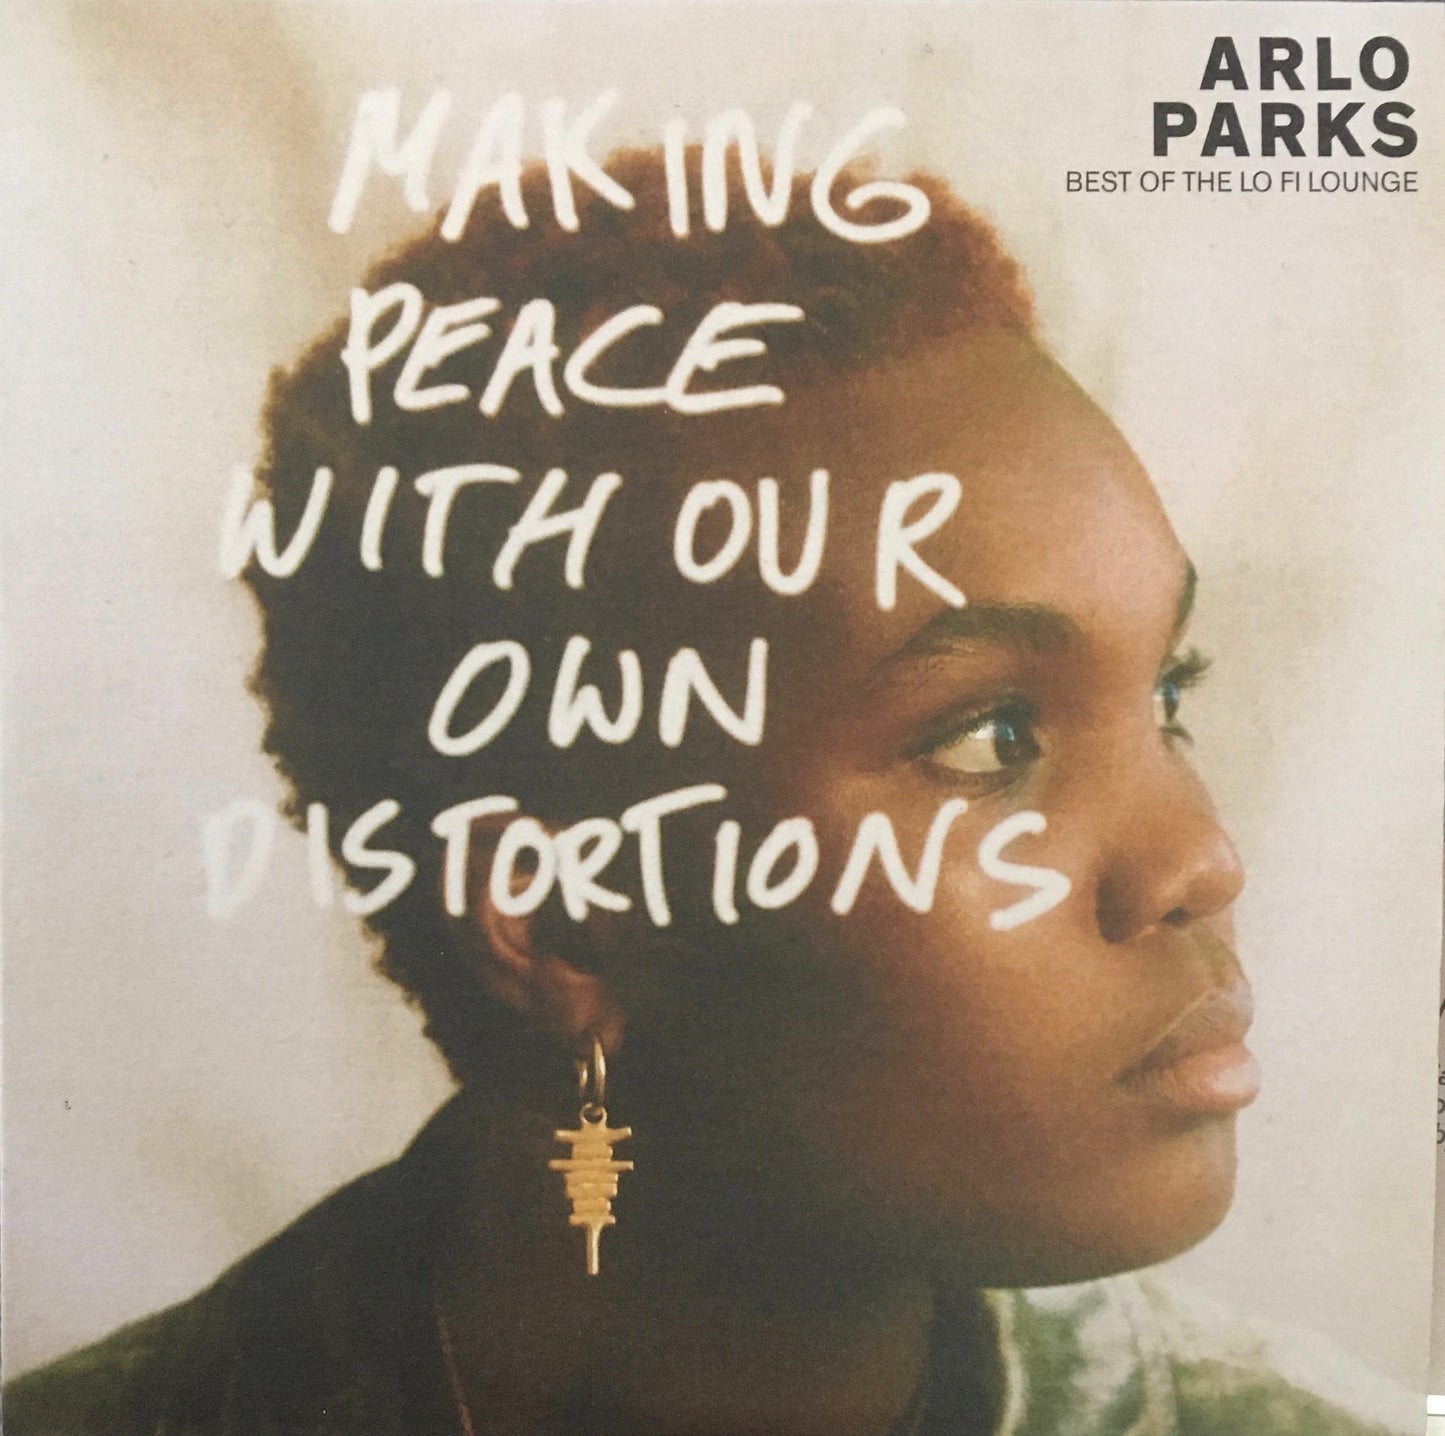 Arlo Parks - Making Peace With Our Distortions (CD)